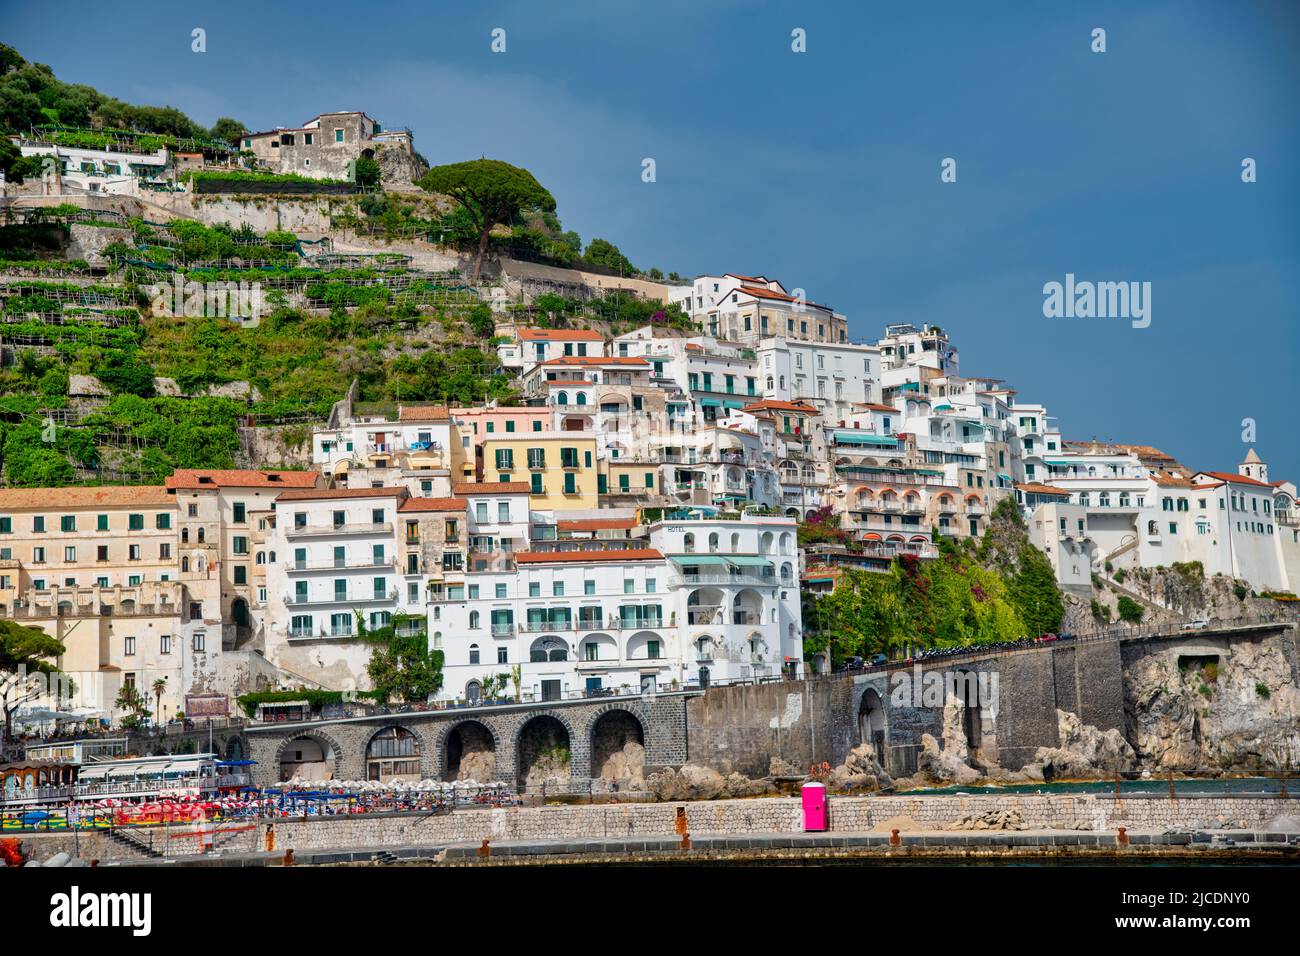 Positano, Italy - June 29, 2021: Town coastline and buildings on a sunny day. Stock Photo